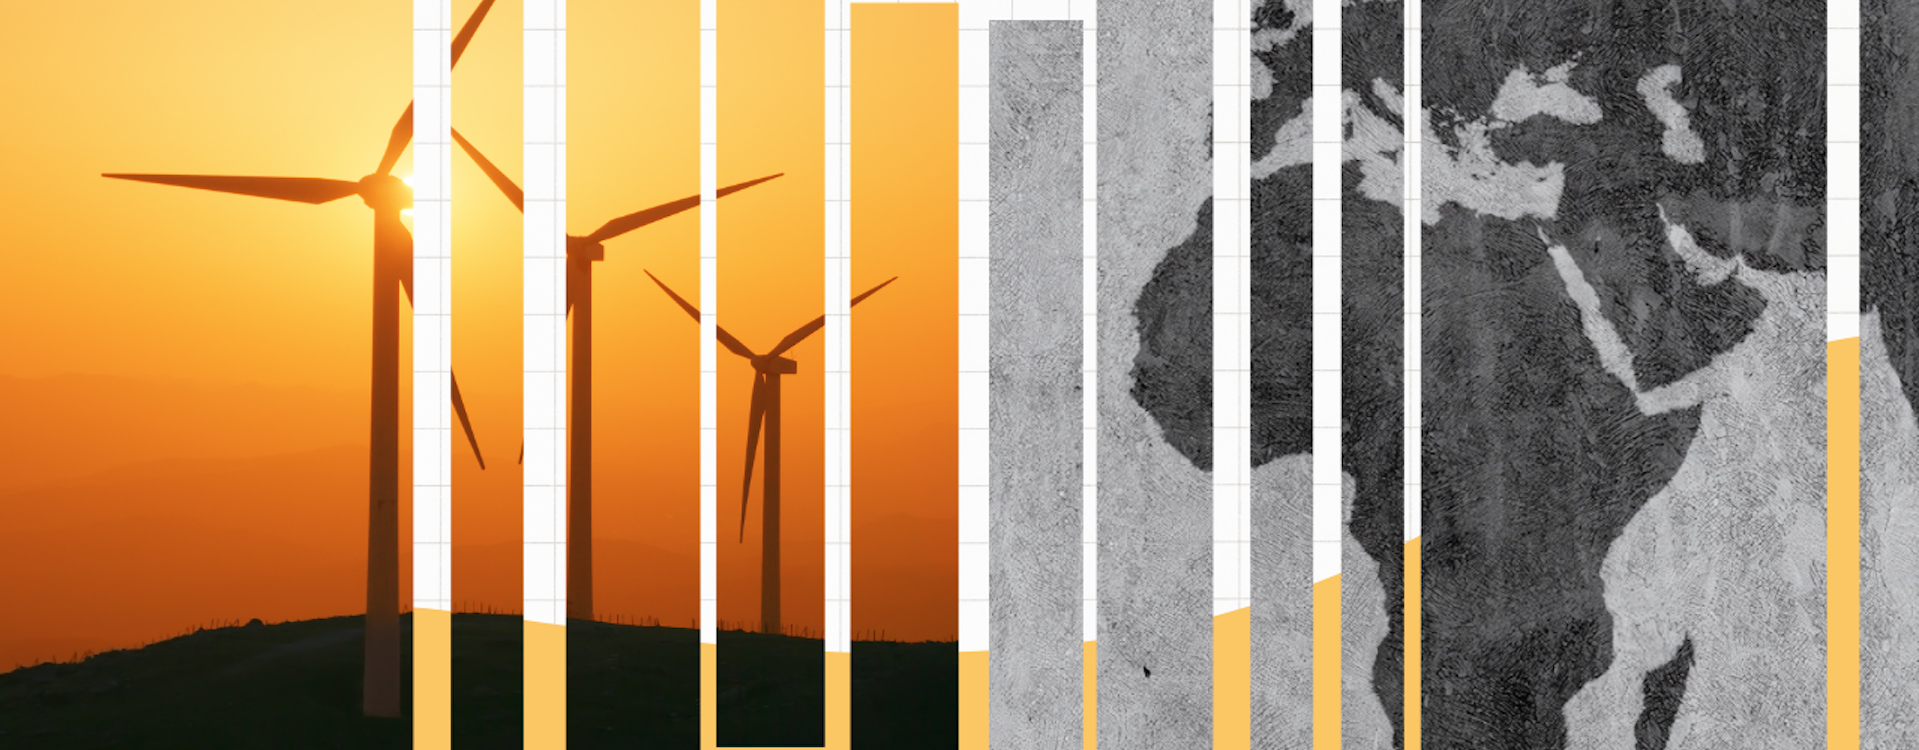 Foresight modelling series: unleashing Africa’s climate and energy future